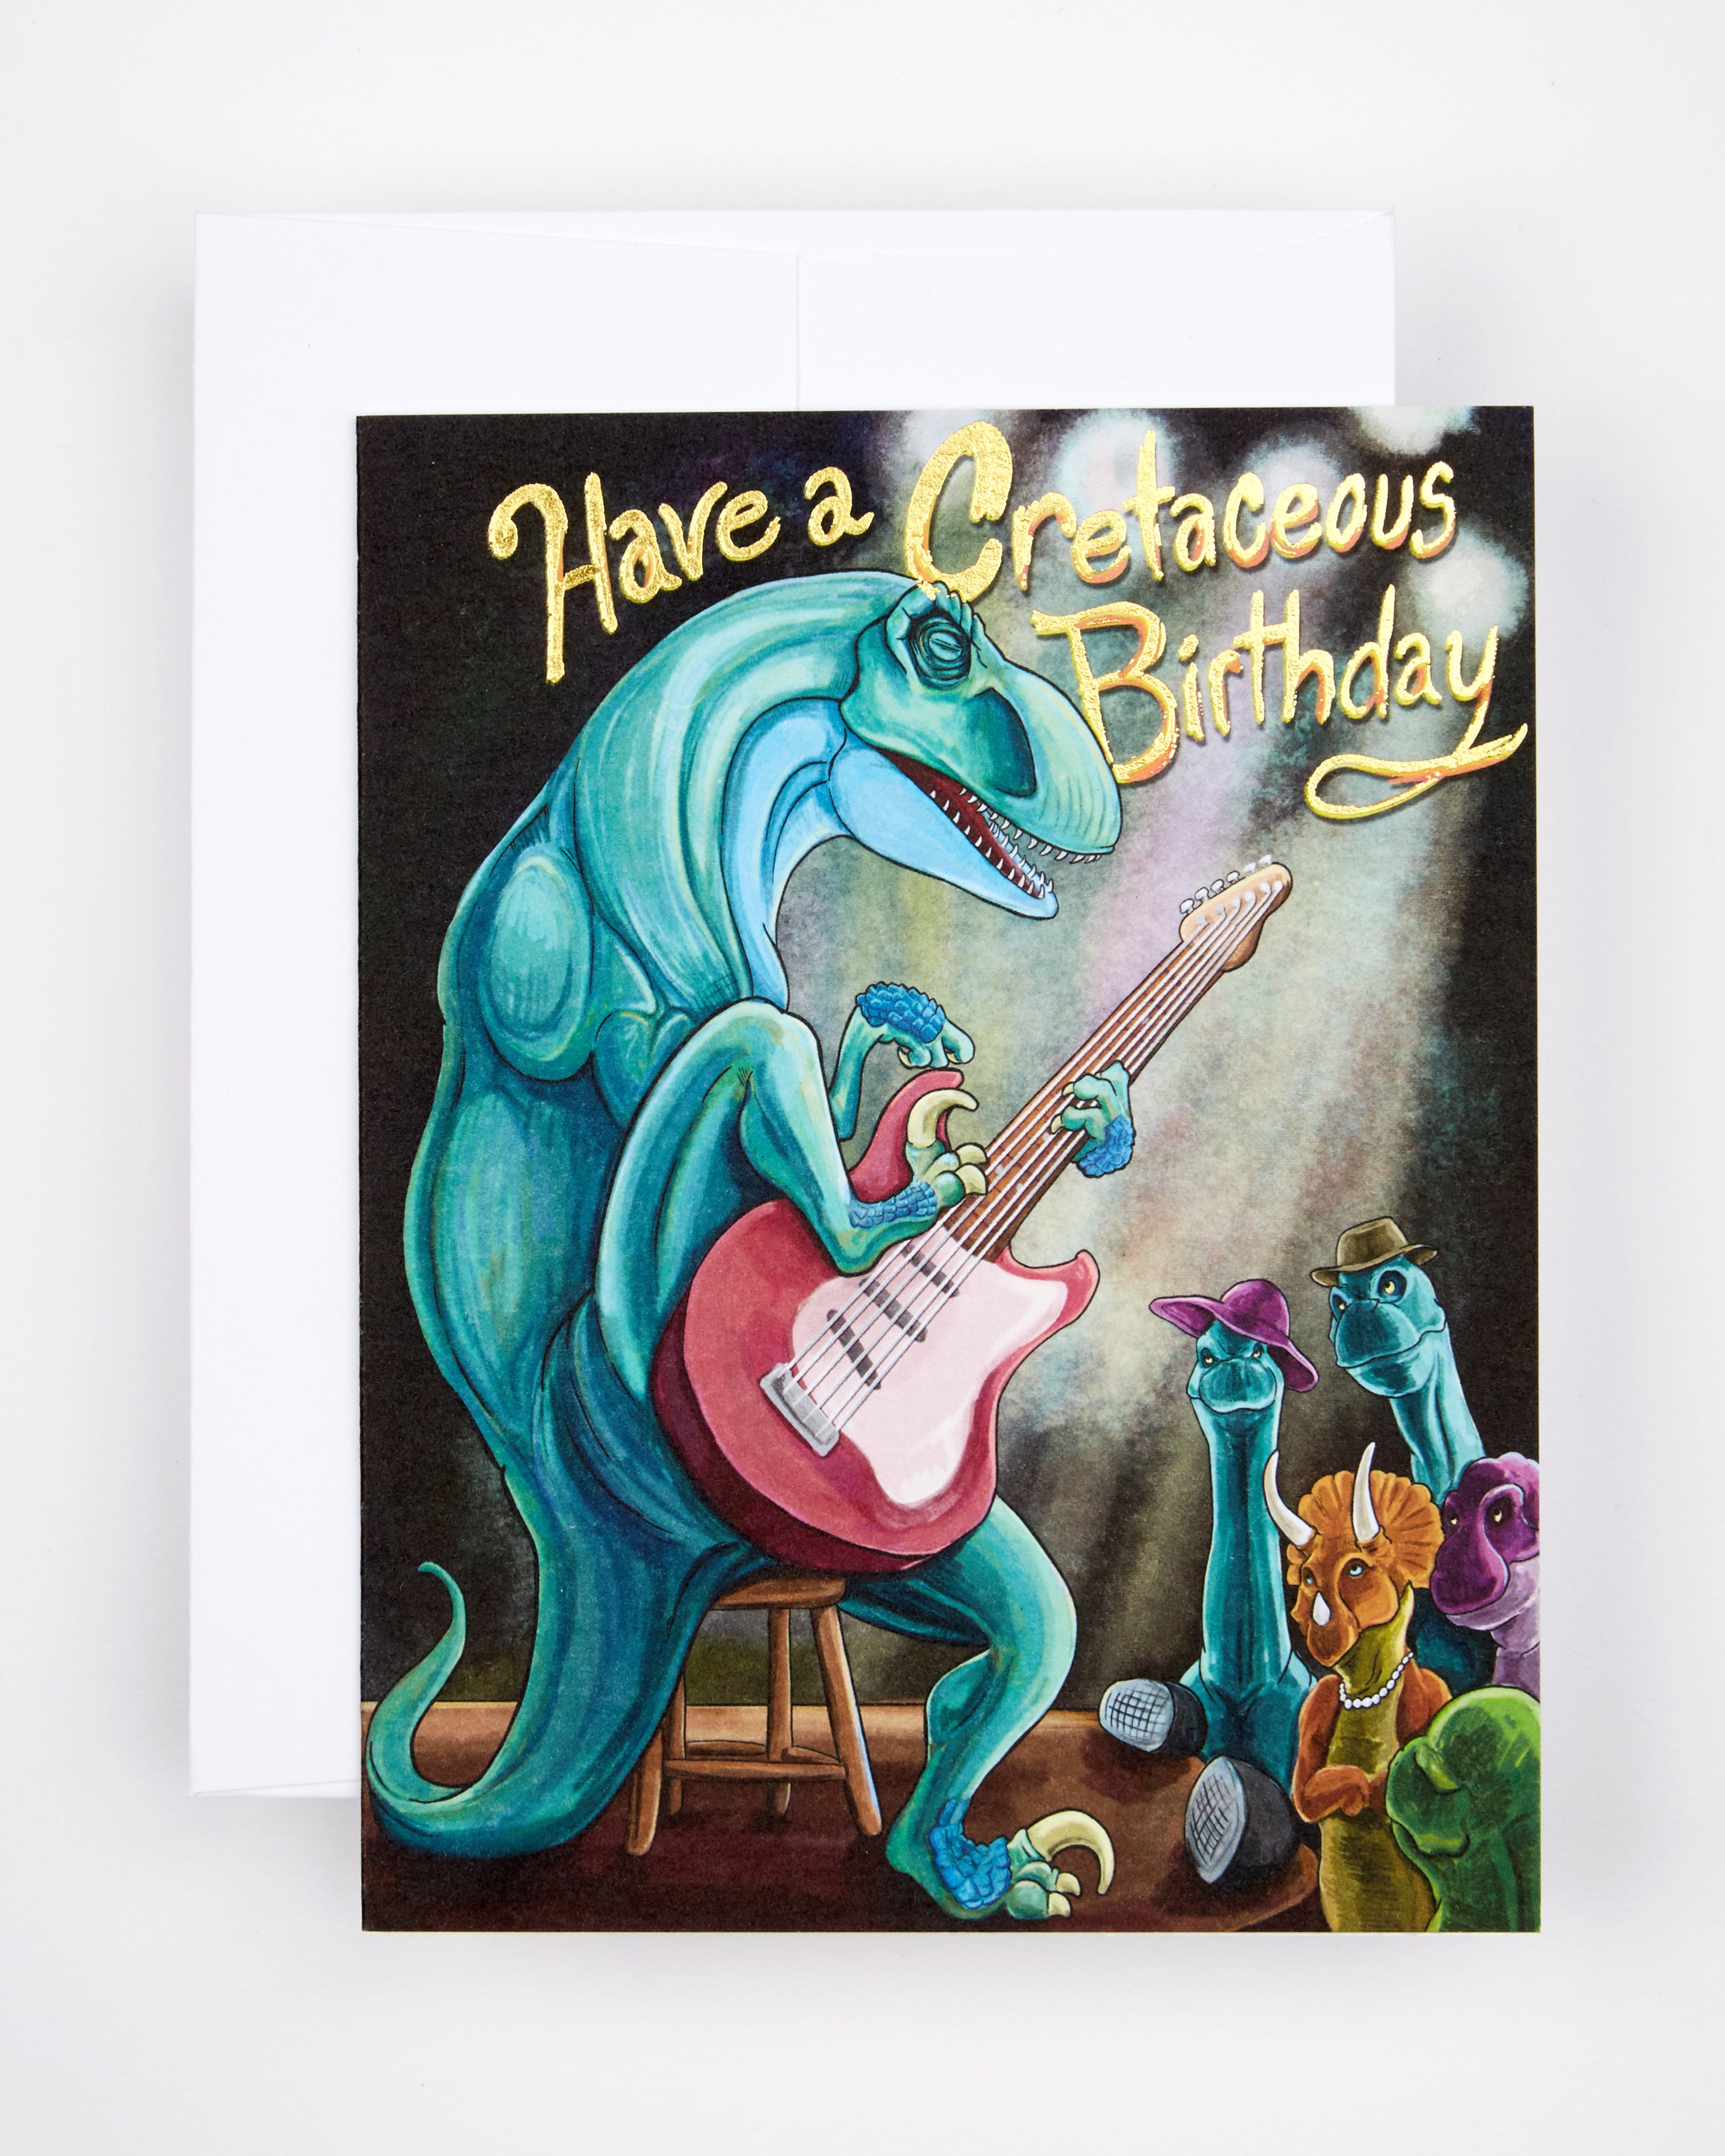 Greeting card with the text Have a Cretaceous Birthday and a guitar-playing dinosaur